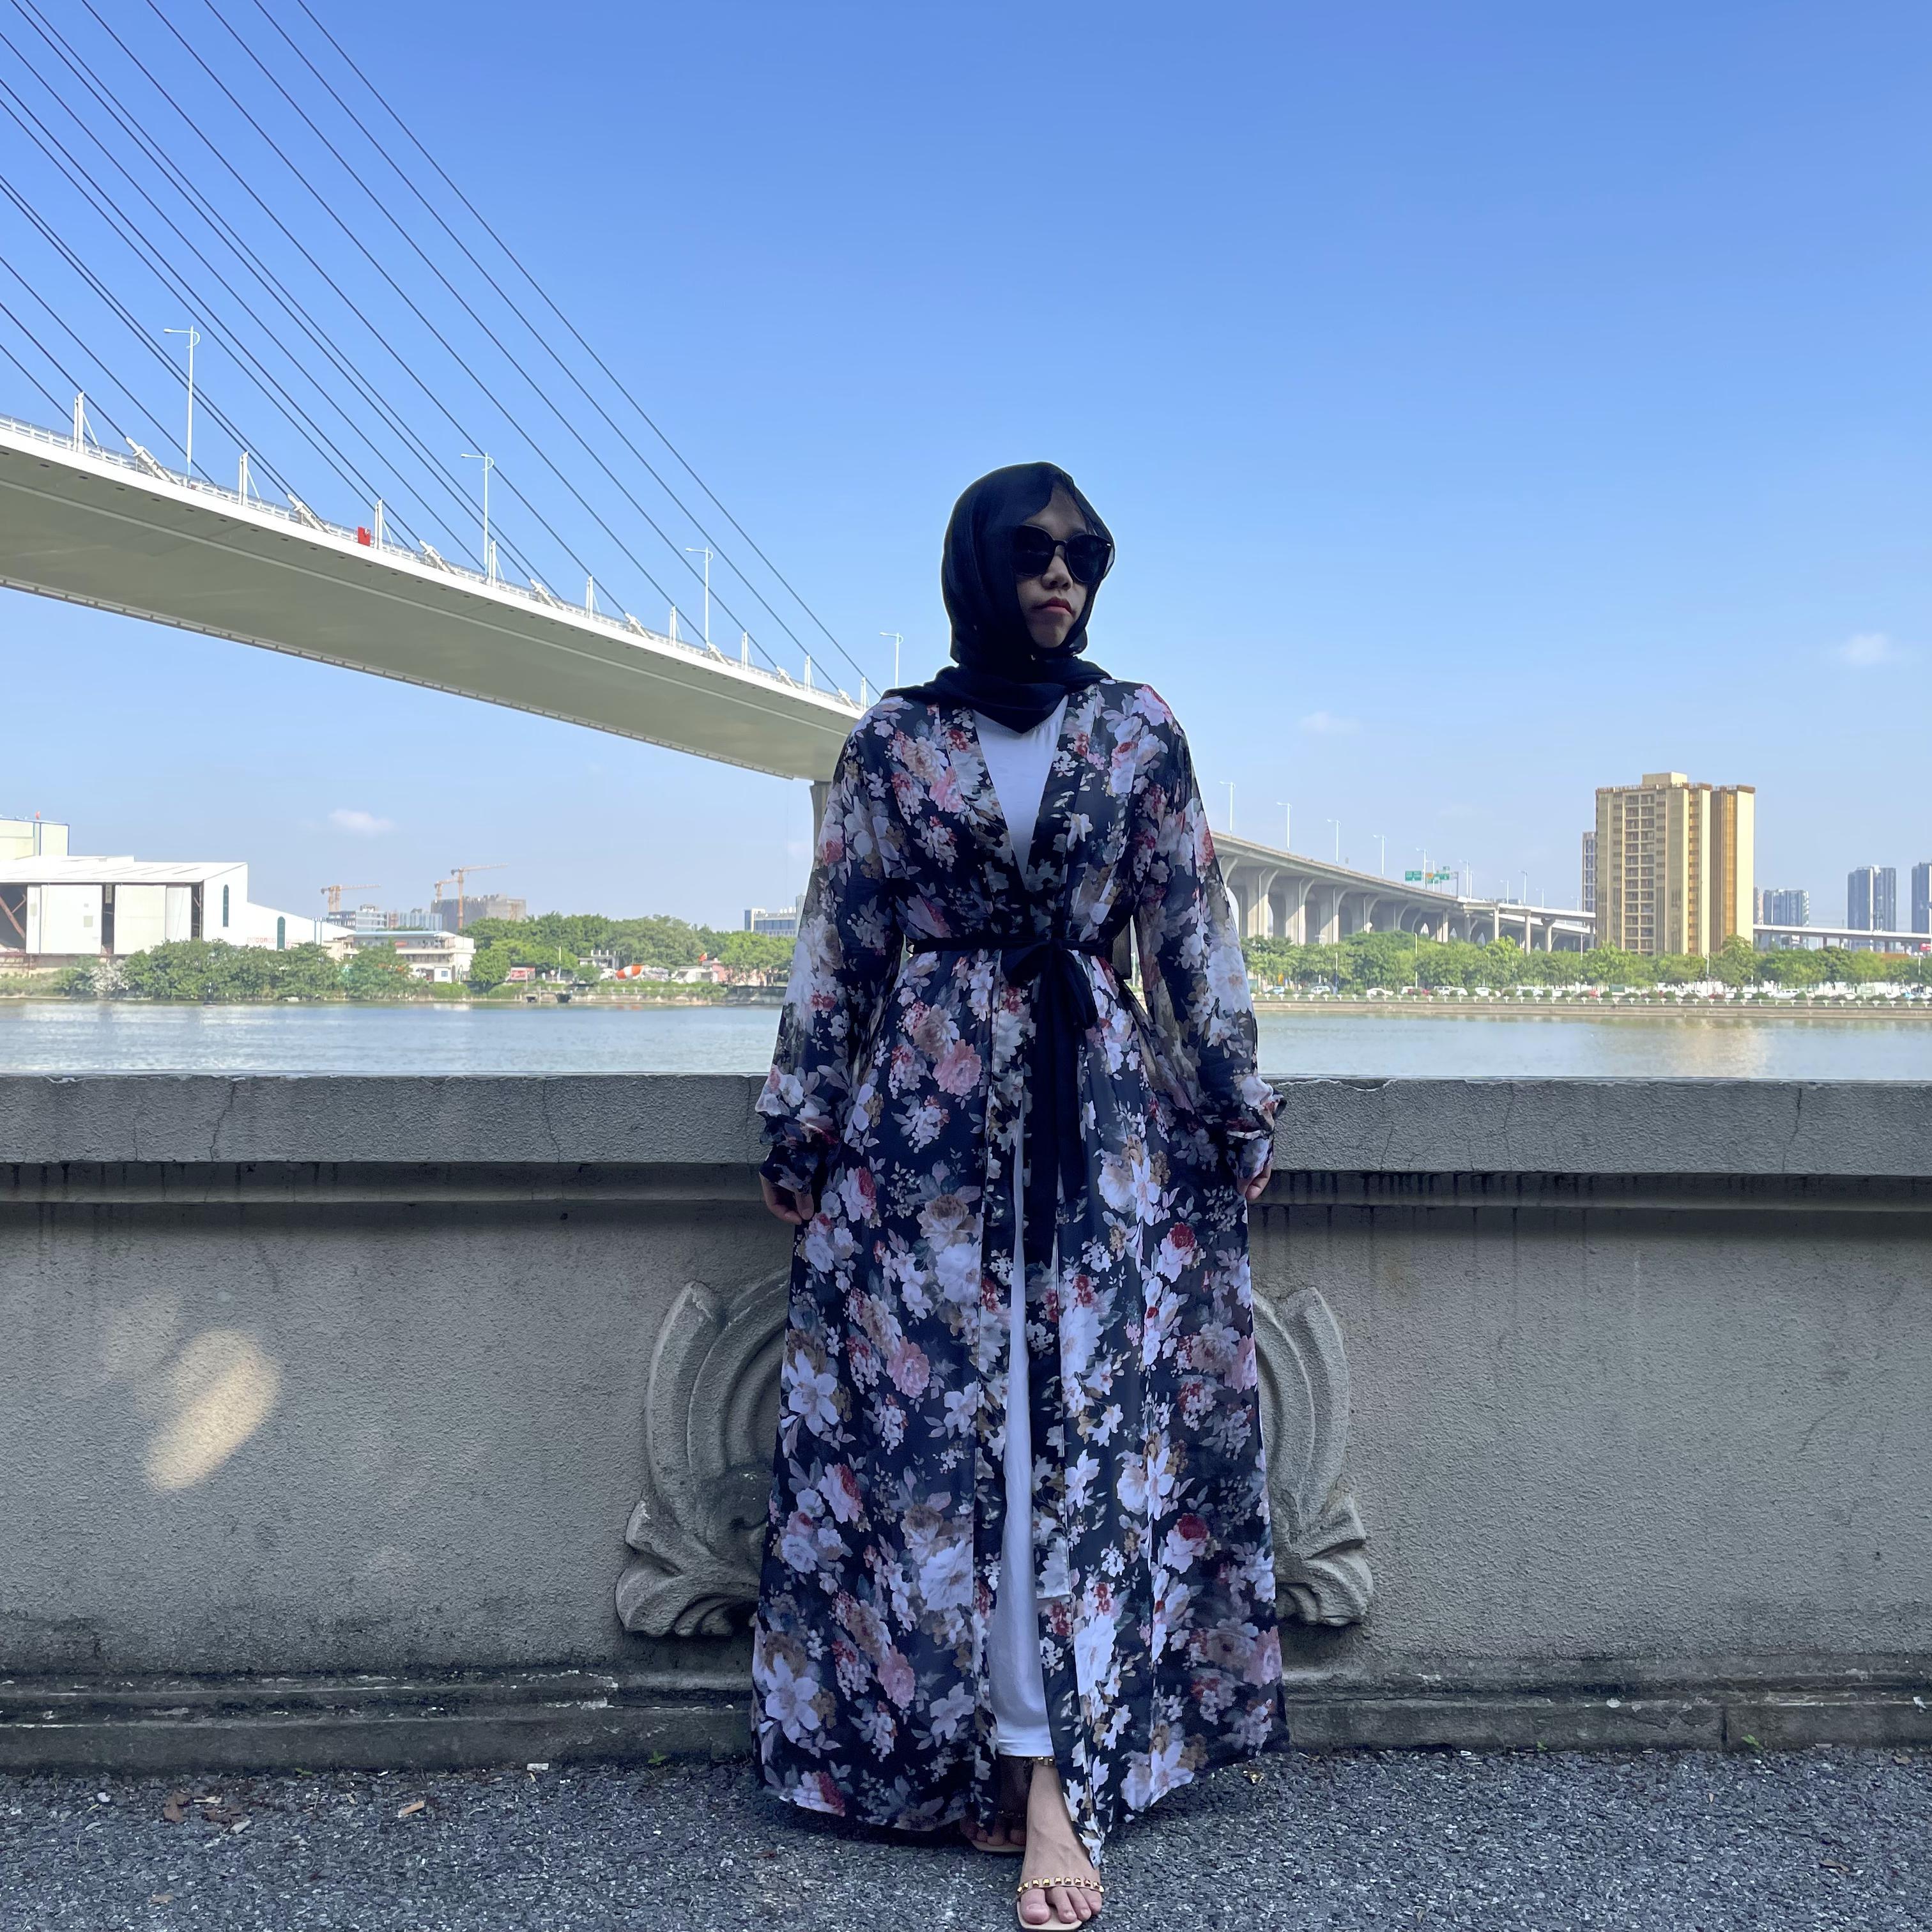 CHAOMENG MUSLIM SHOP1619#New Design Floral Print Black Chiffon Front Open Turkish Muslim Abaya服装CHAOMENGCHAOMENG MUSLIM SHOPCHAOMENG MUSLIM SHOP1619#New Design Floral Print Black Chiffon Front Open Turkish Muslim Abaya - CHAOMENG MUSLIM SHOPBrand Name:None Department Name:Adult Origin:CN(Origin) Fabric Type:Chiffon Material:Polyester Decoration:Sashes Style:Fashion Item Type:ABAYA Model Number:CM1619 More Colors Lined Dress Show All-match Muslim Abaya, Have many colors, You can match abaya in different colors, This is 100% cotton fabric. This quality is very good, You deserve it, If you want to own this dress,you can click on the picture to own this dress. Size Chart : 1 inch = 2.54 cm S: Bust 102 cm,Sleeve 60 cm,Length 133 cm M: Bust 107 cm,Sleeve 60 cm,Length 138 cm L: Bust 112 cm,Sleeve 60 cm,Length 143 cm XL: Bust 117 cm,Sleeve 62 cm,Length 145 cm Model show   Fabric content：polyester 95% spandex 5%     - CHAOMENG MUSLIM SHOP1619#New Design Floral Print Black Chiffon Front Open Turkish Muslim AbayaBrand Name:None Department Name:Adult Origin:CN(Origin) Fabric Type:Chiffon Material:Polyester Decoration:Sashes Style:Fashion Item Type:ABAYA Model Number:CM1619 More Colors Lined Dress Show All-match Muslim Abaya, Have many colors, You can match abaya in different colors, This is 100% cotton fabric. This quality is very good, You deserve it, If you want to own this dress,you can click on the picture to own this dress. Size Chart : 1 inch = 2.54 cm S: Bust 102 cm,Sleeve 60 cm,Length 133 cm M: Bust 107 cm,Sleeve 60 cm,Length 138 cm L: Bust 112 cm,Sleeve 60 cm,Length 143 cm XL: Bust 117 cm,Sleeve 62 cm,Length 145 cm Model show   Fabric content：polyester 95% spandex 5%    服装21.9CHAOMENGCHAOMENG MUSLIM SHOP1619#New Design Floral Print Black Chiffon Front Open Turkish Muslim AbayaBrand Name:None Department Name:Adult Origin:CN(Origin) Fabric Type:Chiffon Material:Polyester Decoration:Sashes Style:Fashion Item Type:ABAYA Model Number:CM1619 More Colors Lined Dress Show All-match Muslim Abaya, Have many colors, You can match abaya in different colors, This is 100% cotton fabric. This quality is very good, You deserve it, If you want to own this dress,you can click on the picture to own this dress. Size Chart : 1 inch = 2.54 cm S: Bust 102 cm,Sleeve 60 cm,Length 133 cm M: Bust 107 cm,Sleeve 60 cm,Length 138 cm L: Bust 112 cm,Sleeve 60 cm,Length 143 cm XL: Bust 117 cm,Sleeve 62 cm,Length 145 cm Model show   Fabric content：polyester 95% spandex 5%    服装21.9CHAOMENG1619#New Design Floral Print Black Chiffon Front Open Turkish Muslim Abaya - CHAOMENG MUSLIM SHOPBrand Name:None Department Name:Adult Origin:CN(Origin) Fabric Type:Chiffon Material:Polyester Decoration:Sashes Style:Fashion Item Type:ABAYA Model Number:CM1619 More Colors Lined Dress Show All-match Muslim Abaya, Have many colors, You can match abaya in different colors, This is 100% cotton fabric. This quality is very good, You deserve it, If you want to own this dress,you can click on the picture to own this dress. Size Chart : 1 inch = 2.54 cm S: Bust 102 cm,Sleeve 60 cm,Length 133 cm M: Bust 107 cm,Sleeve 60 cm,Length 138 cm L: Bust 112 cm,Sleeve 60 cm,Length 143 cm XL: Bust 117 cm,Sleeve 62 cm,Length 145 cm Model show   Fabric content：polyester 95% spandex 5%     - CHAOMENG MUSLIM SHOP1619#New Design Floral Print Black Chiffon Front Open Turkish Muslim AbayaBrand Name:None Department Name:Adult Origin:CN(Origin) Fabric Type:Chiffon Material:Polyester Decoration:Sashes Style:Fashion Item Type:ABAYA Model Number:CM1619 More Colors Lined Dress Show All-match Muslim Abaya, Have many colors, You can match abaya in different colors, This is 100% cotton fabric. This quality is very good, You deserve it, If you want to own this dress,you can click on the picture to own this dress. Size Chart : 1 inch = 2.54 cm S: Bust 102 cm,Sleeve 60 cm,Length 133 cm M: Bust 107 cm,Sleeve 60 cm,Length 138 cm L: Bust 112 cm,Sleeve 60 cm,Length 143 cm XL: Bust 117 cm,Sleeve 62 cm,Length 145 cm Model show   Fabric content：polyester 95% spandex 5%    服装21.9CHAOMENG